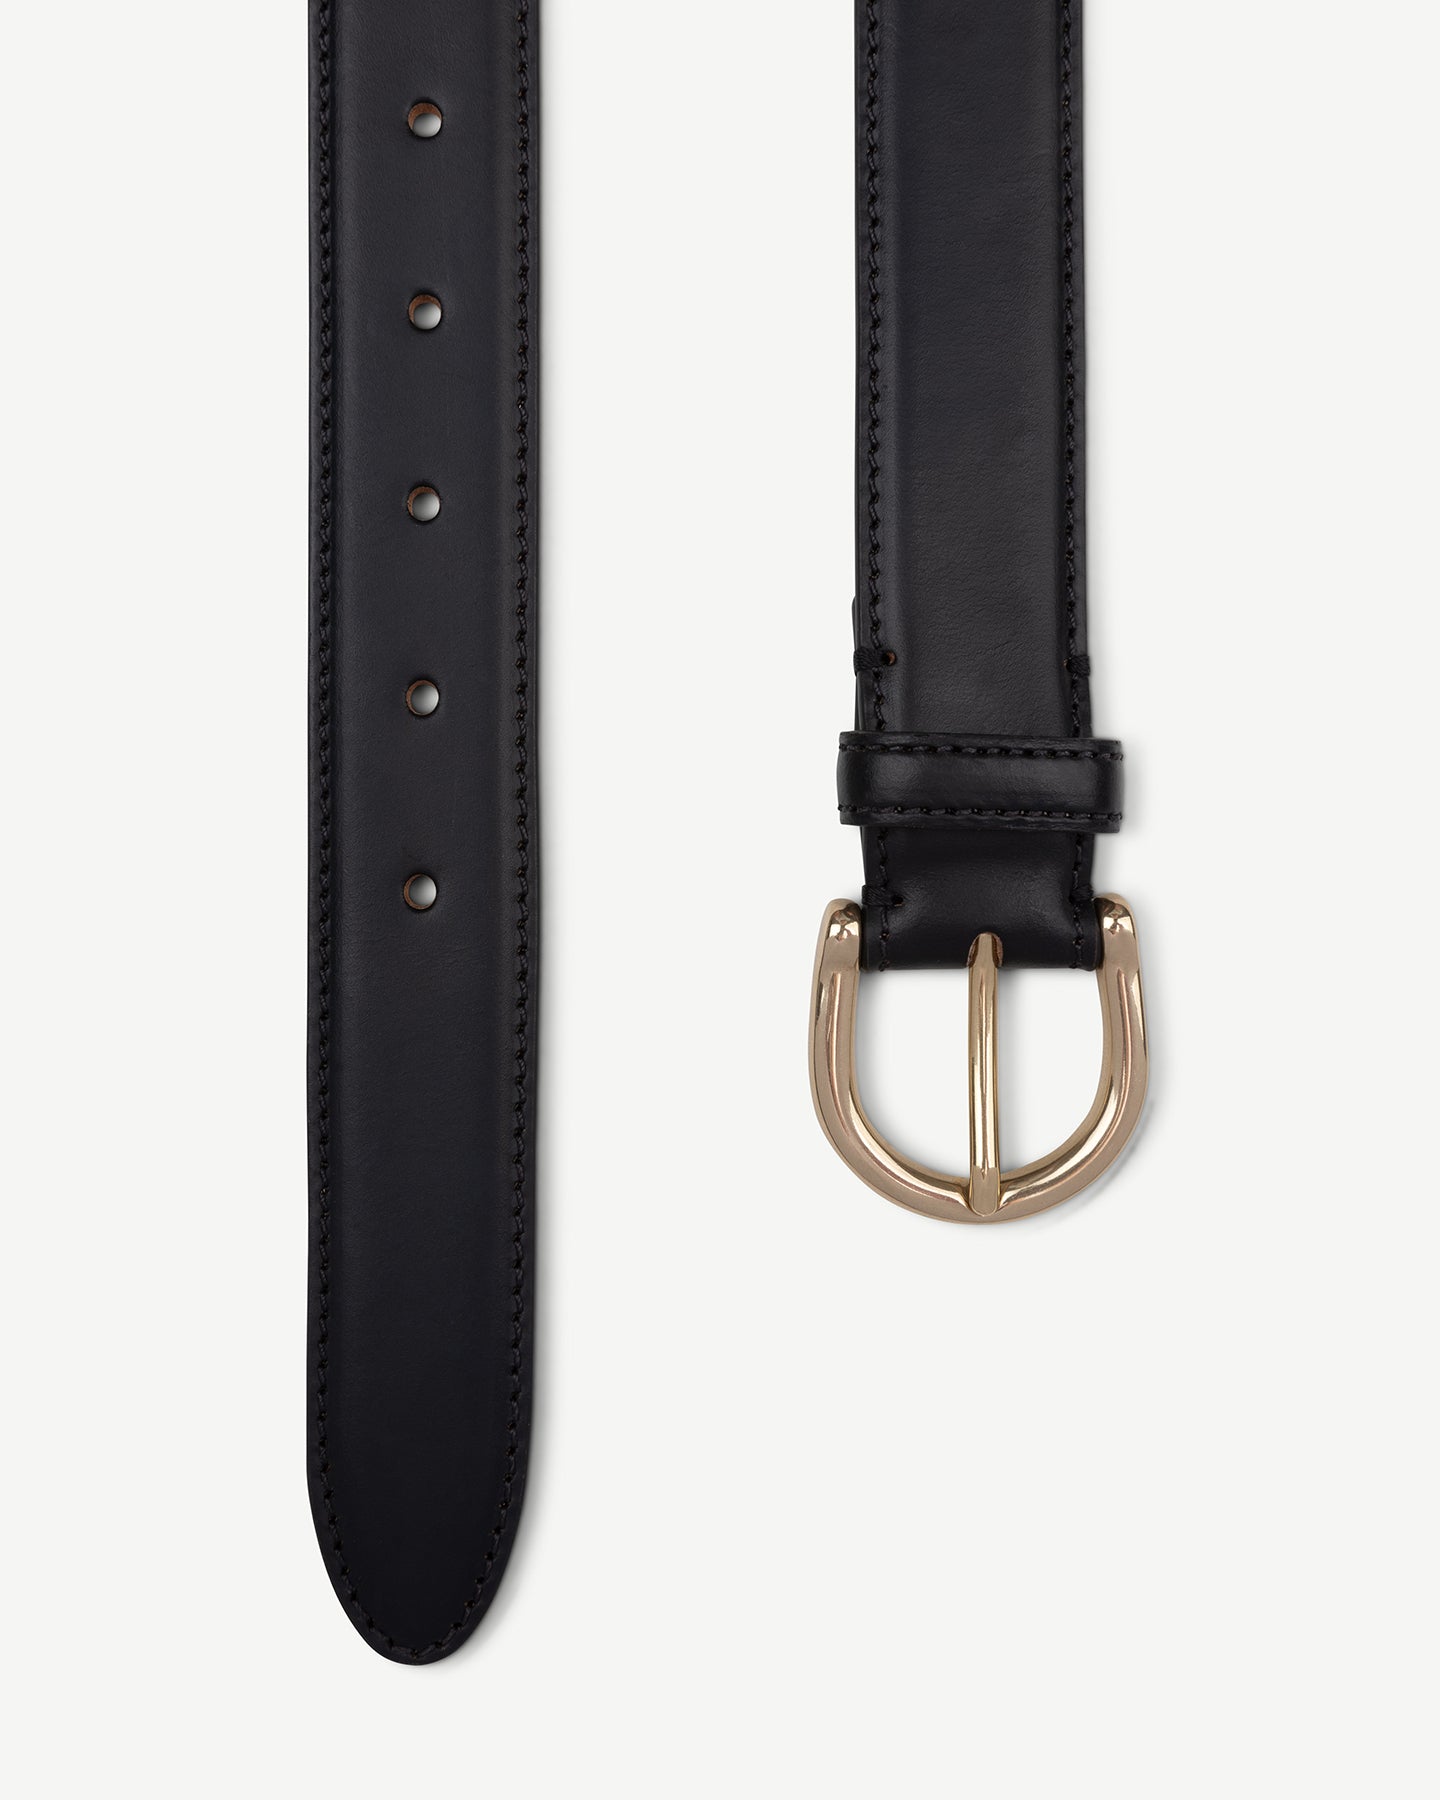 Black leather dress belt with solid brass buckle